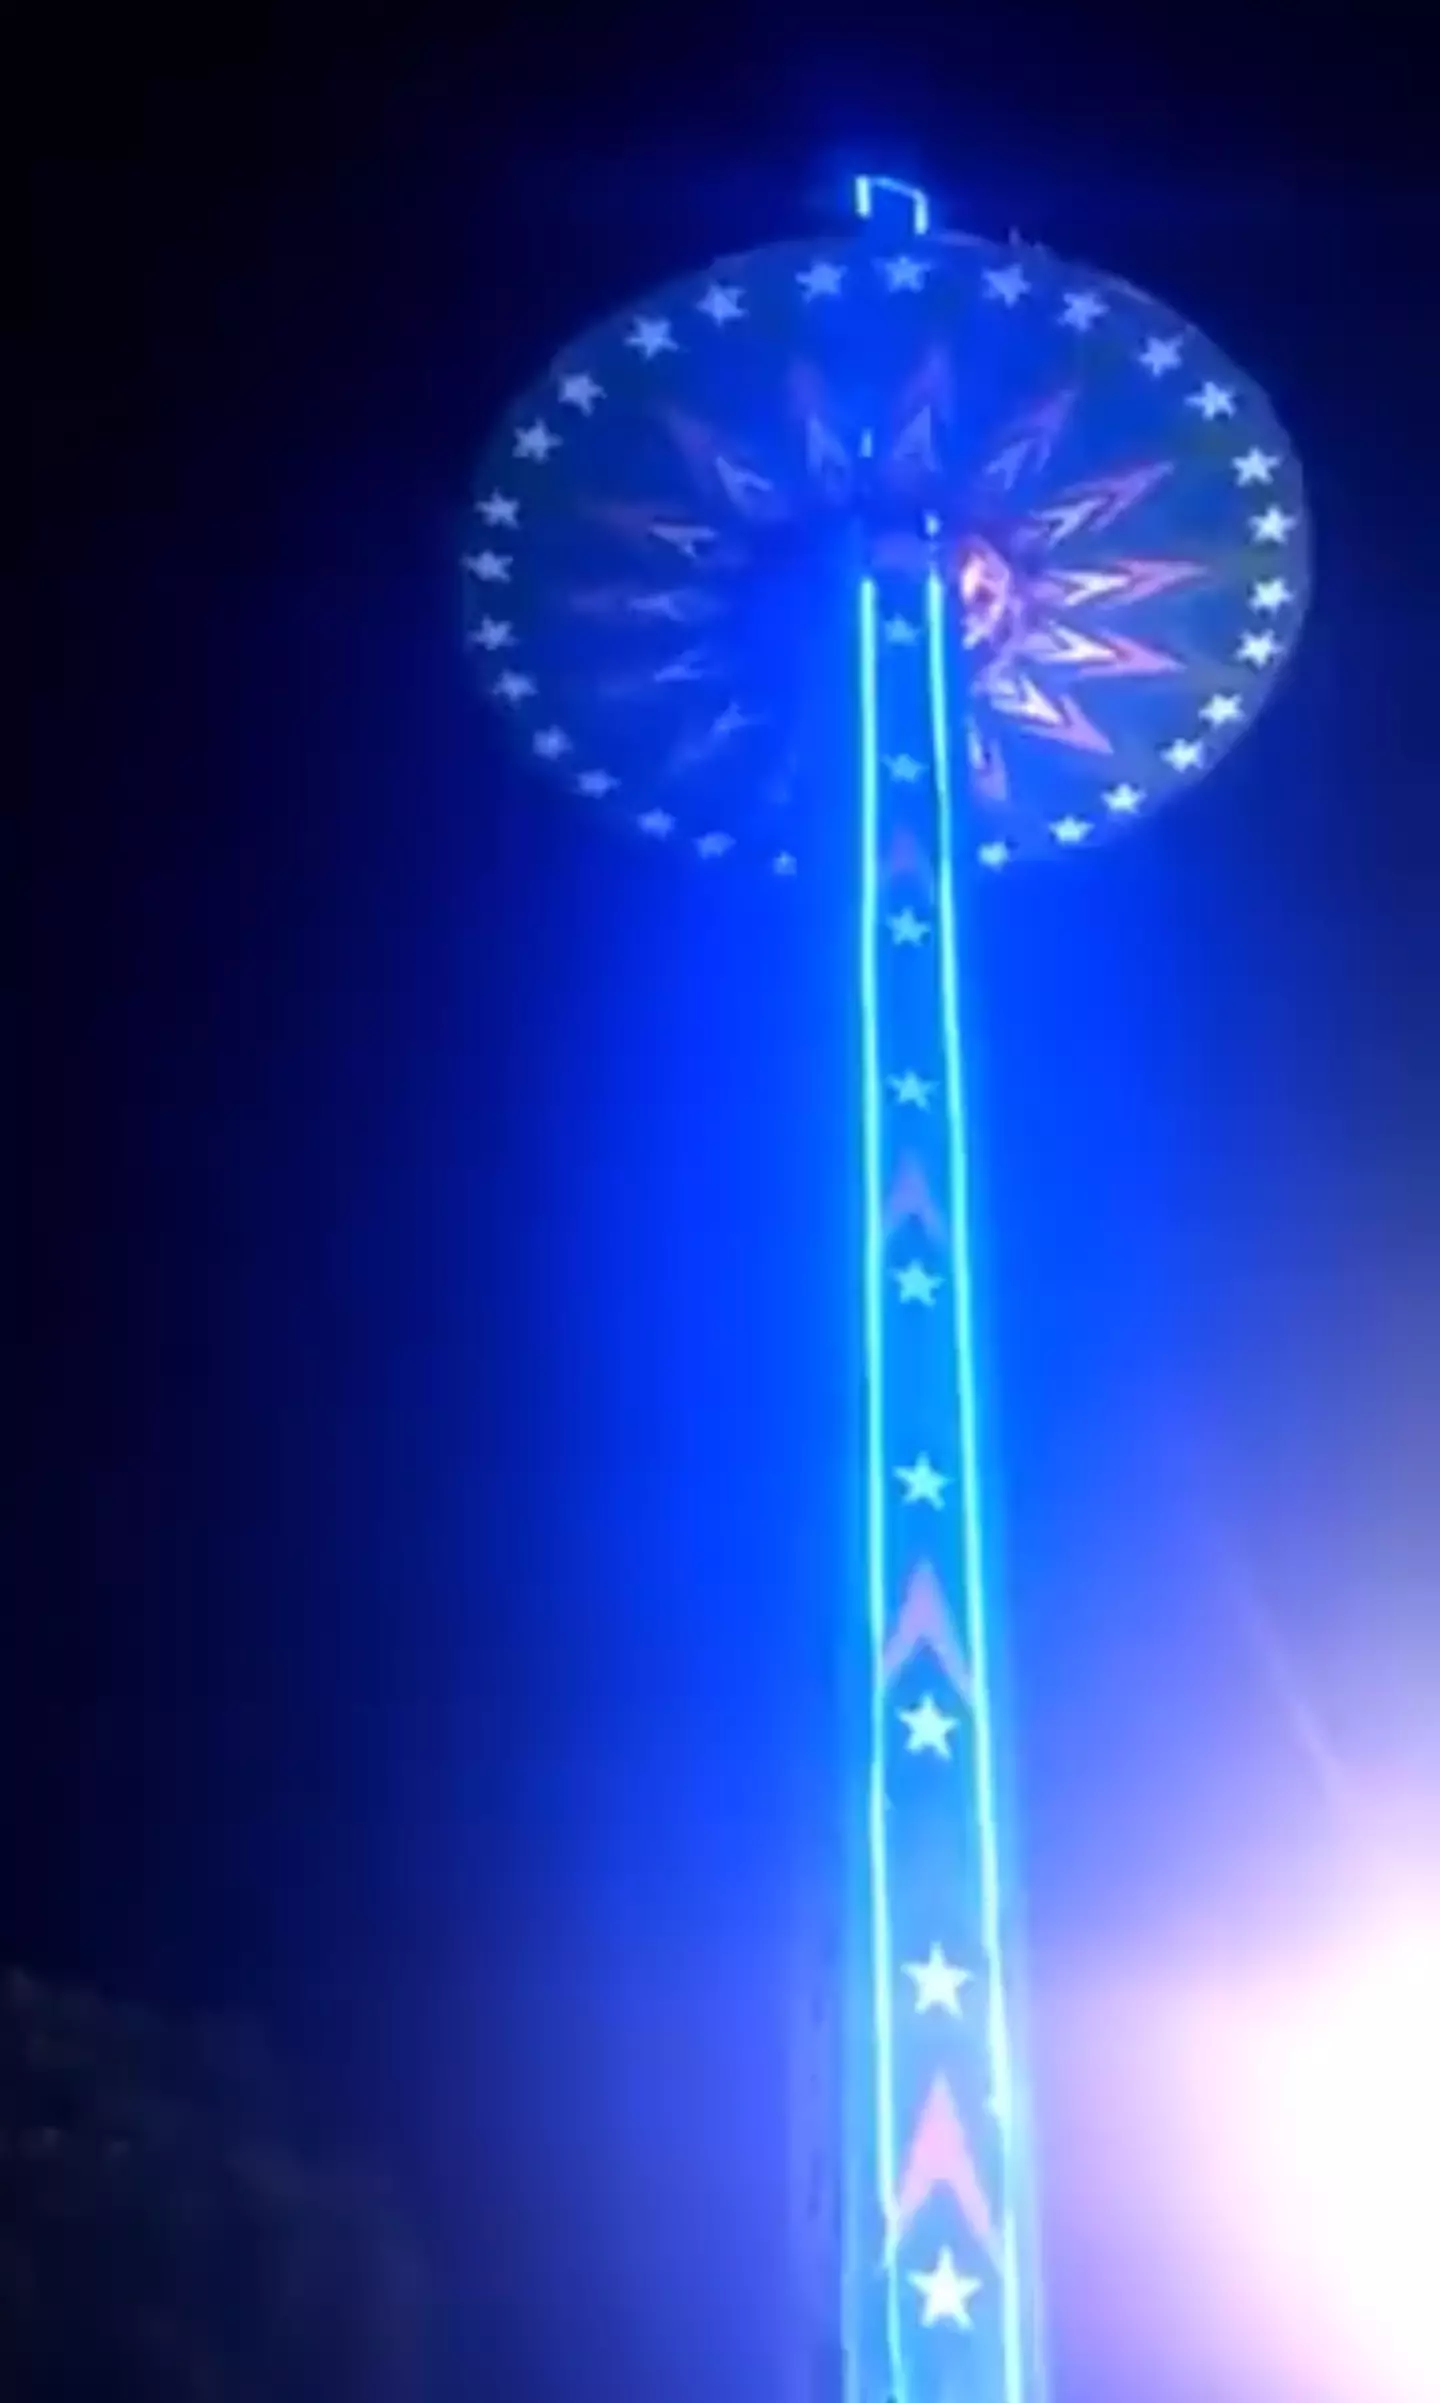 The ride was at it's peak before crashing down.